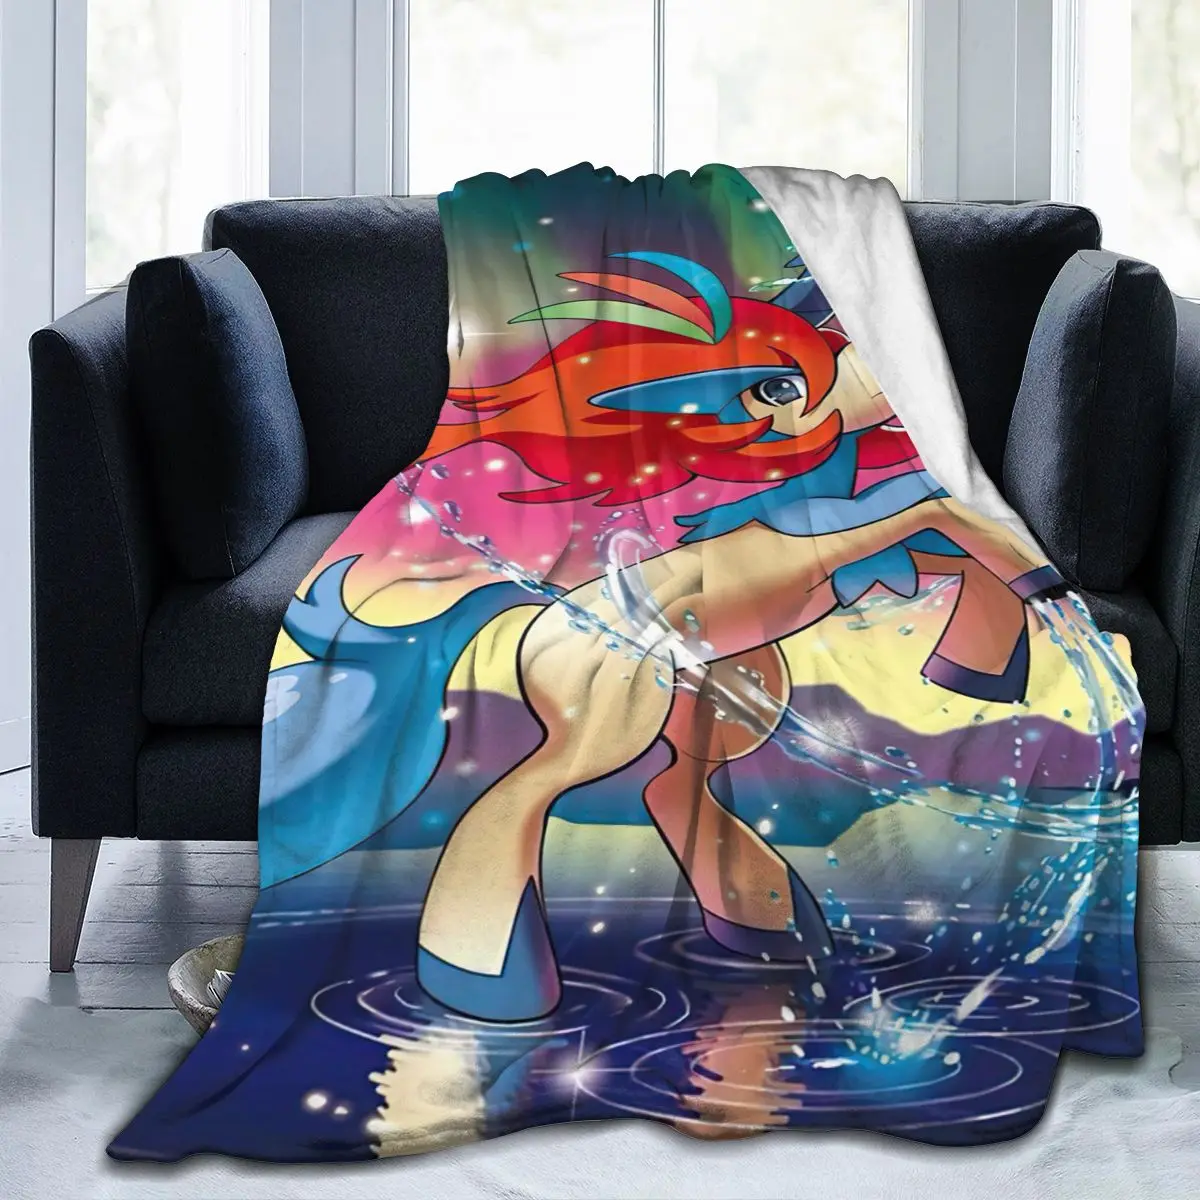 

Ultra Soft Sofa Blanket Cover Blanket Cartoon Cartoon Bedding Flannel plied Sofa Bedroom Decor for Children and Adults 278696471